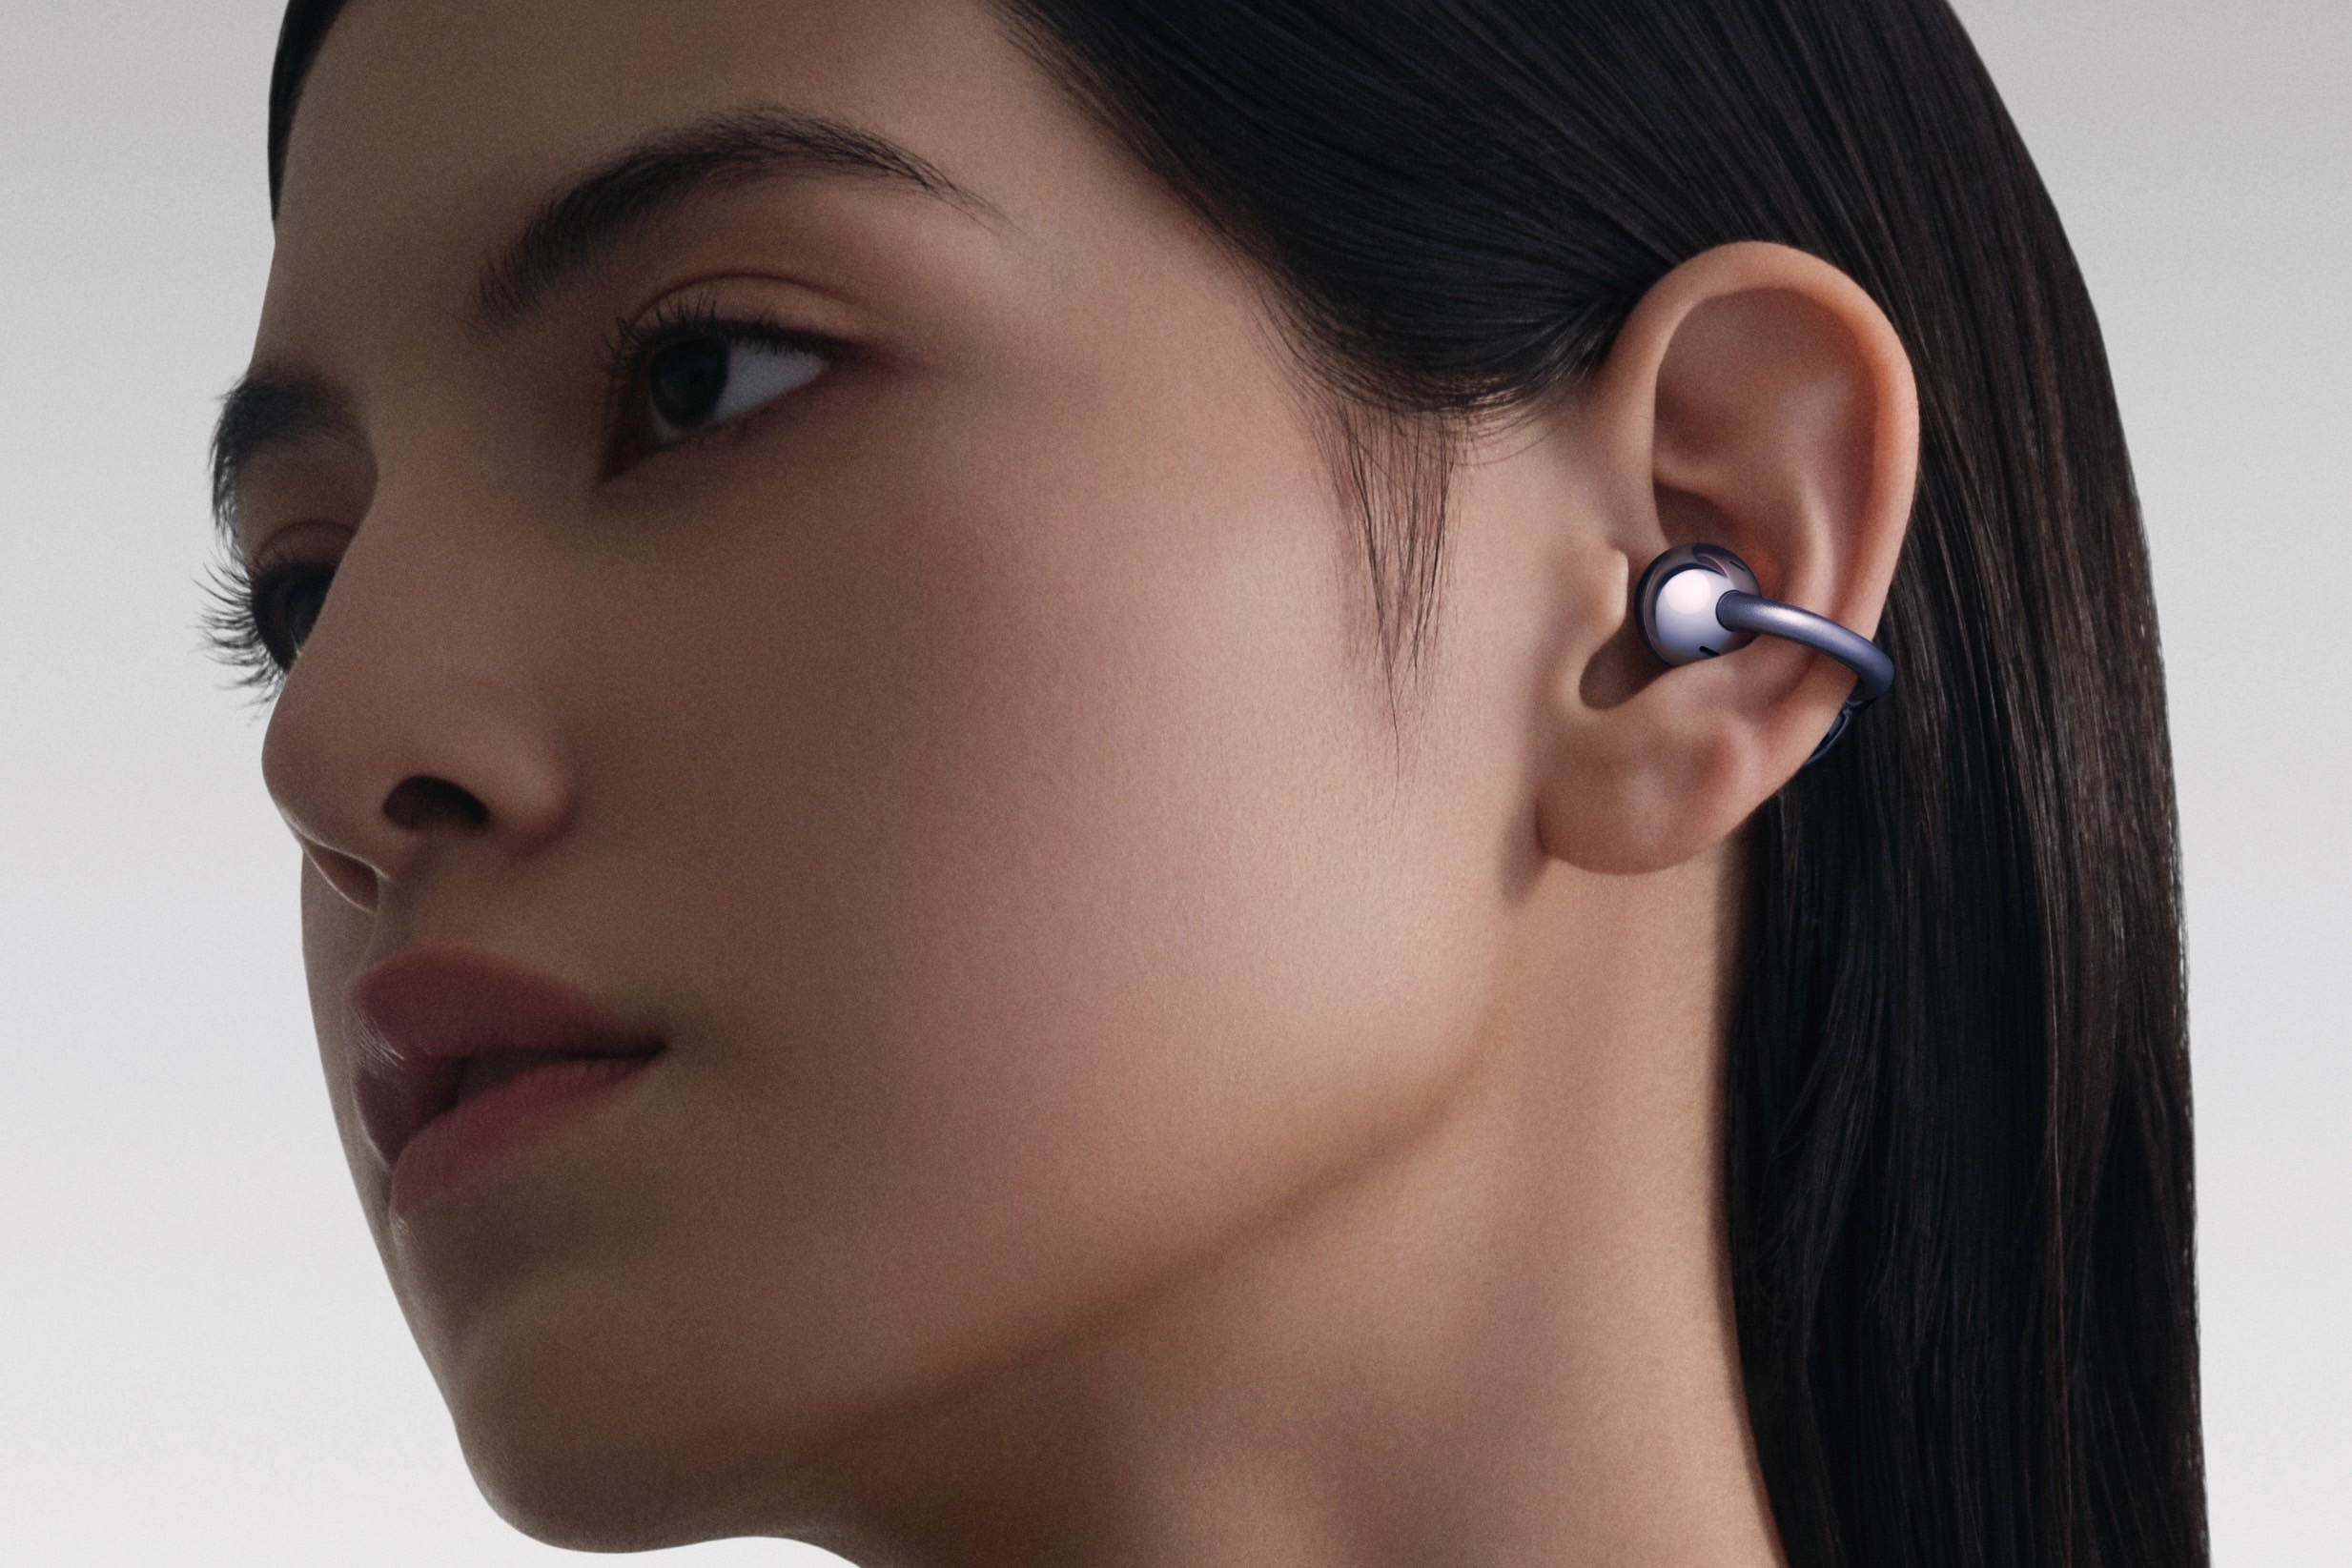 Huawei FreeClip Review: A bold new take on open fit earphones